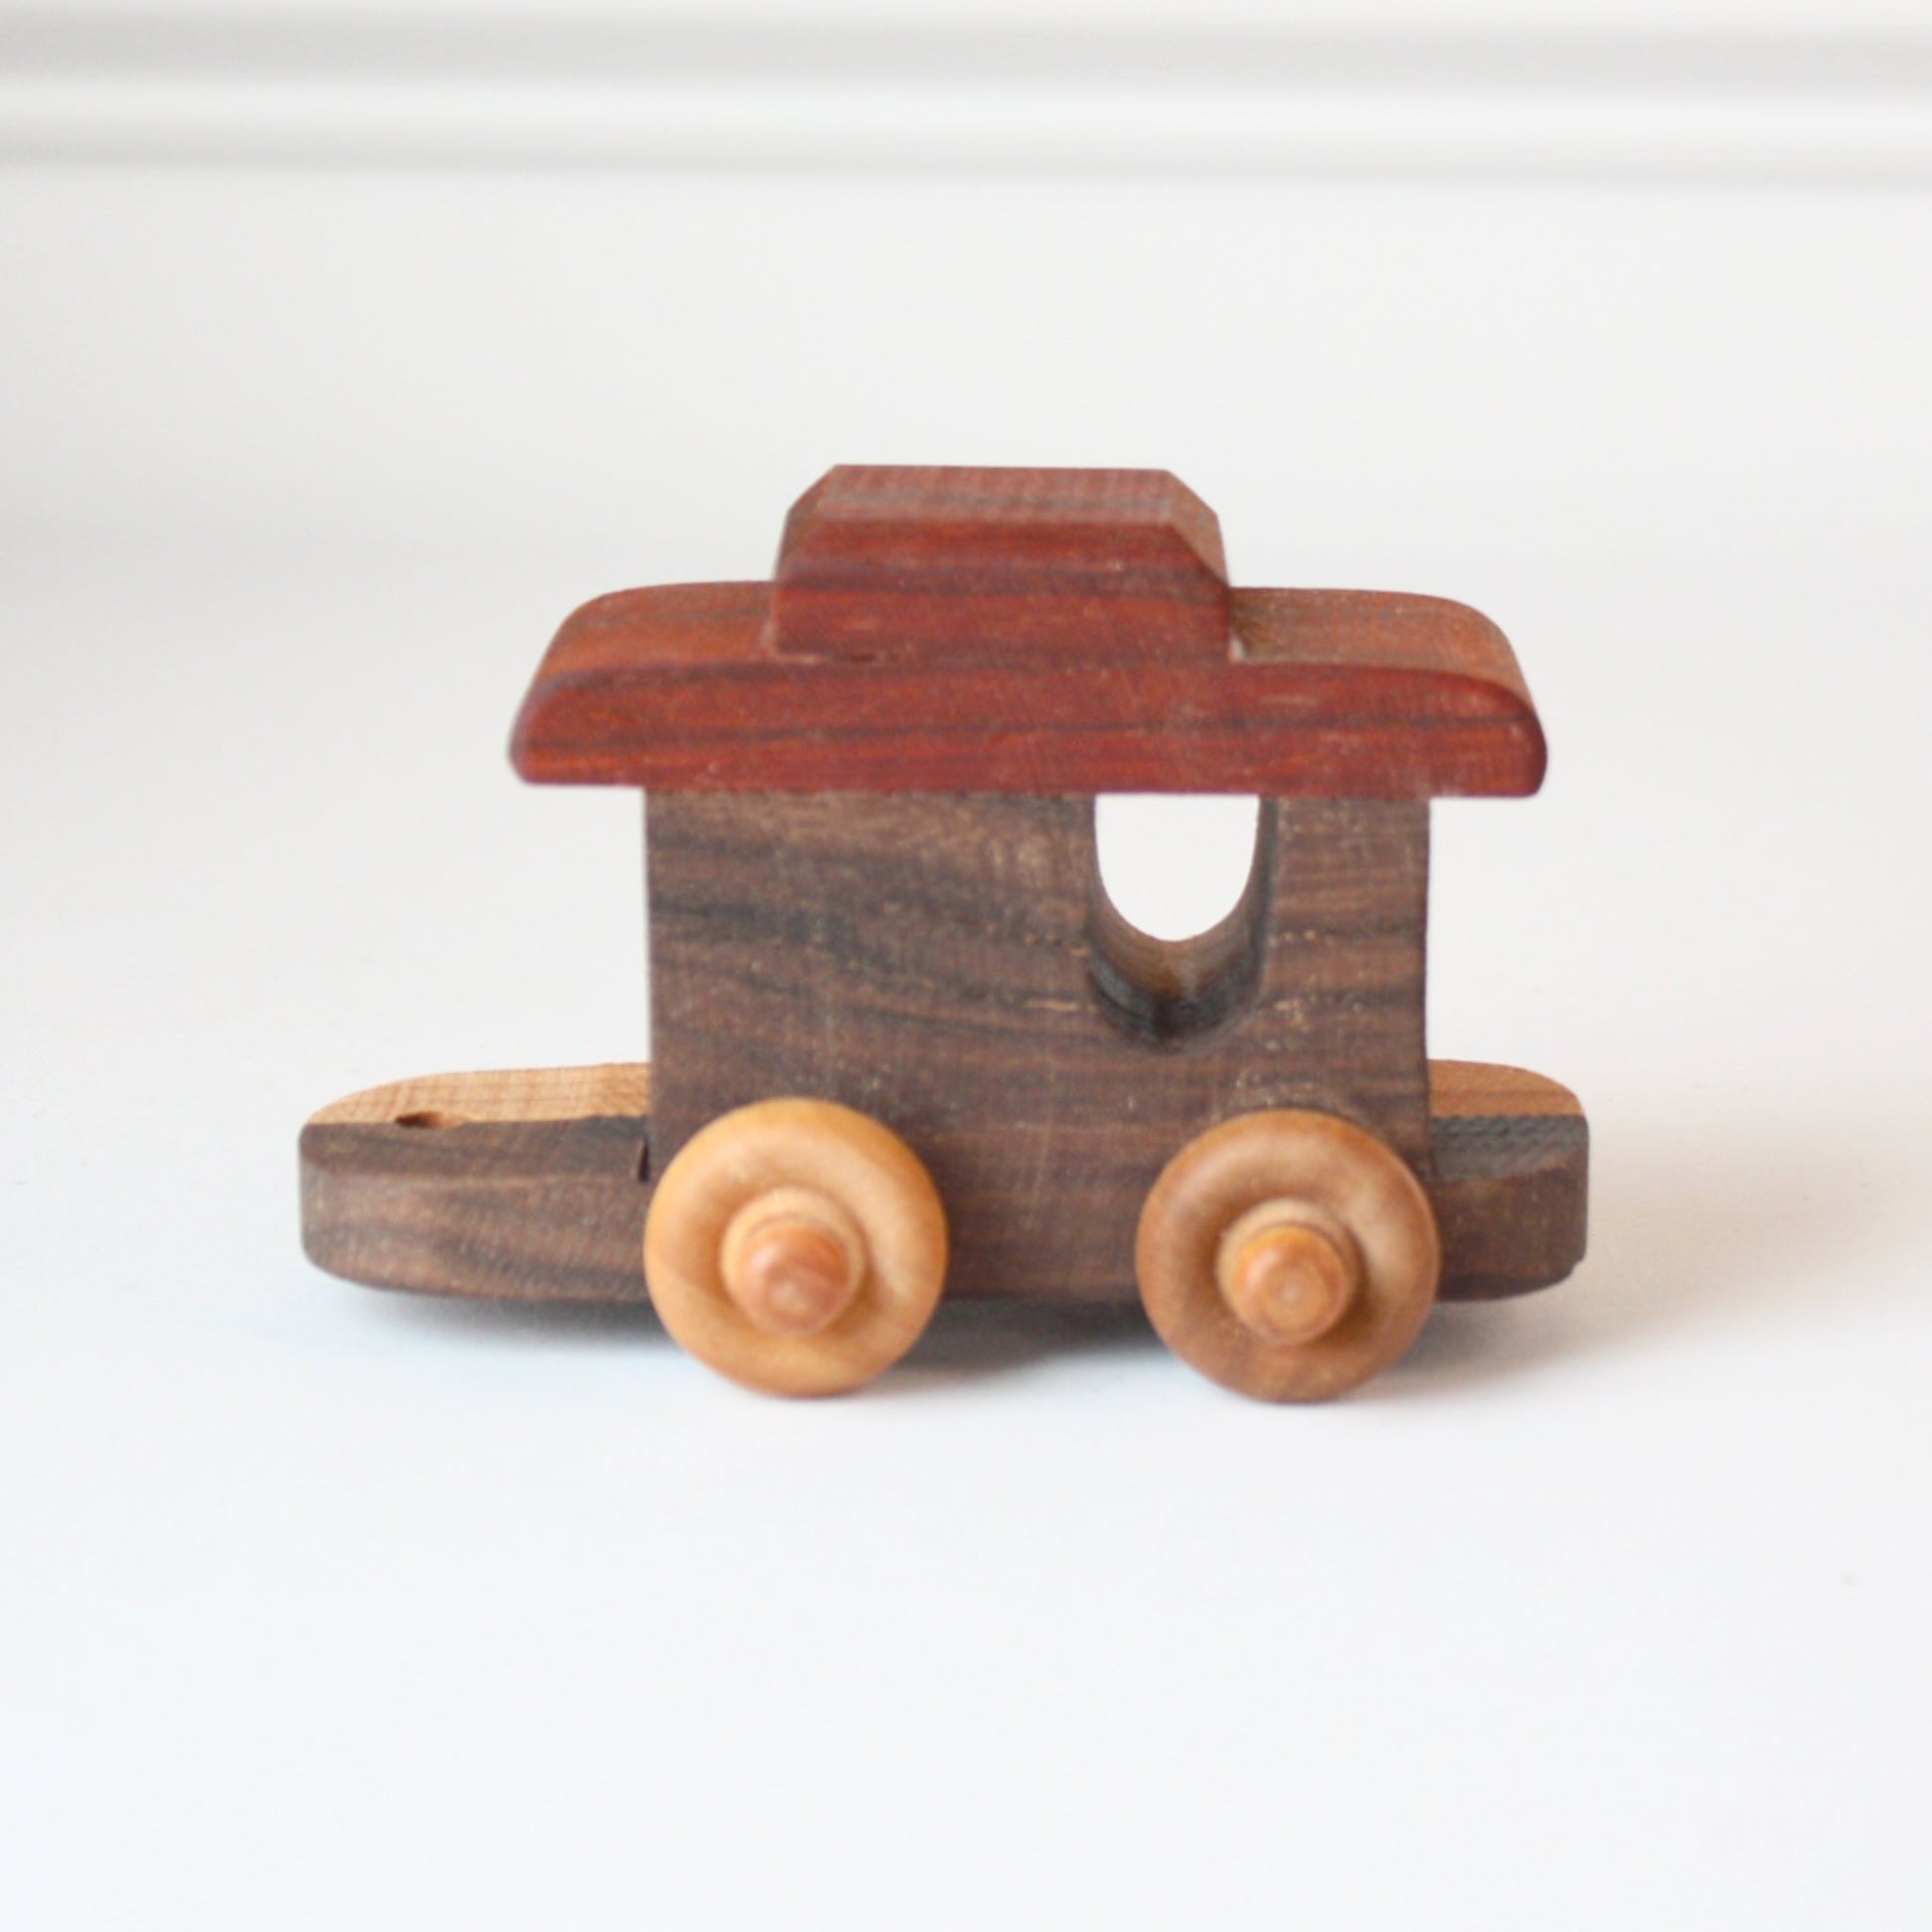 Wooden Toy Train Set - Made in the USA